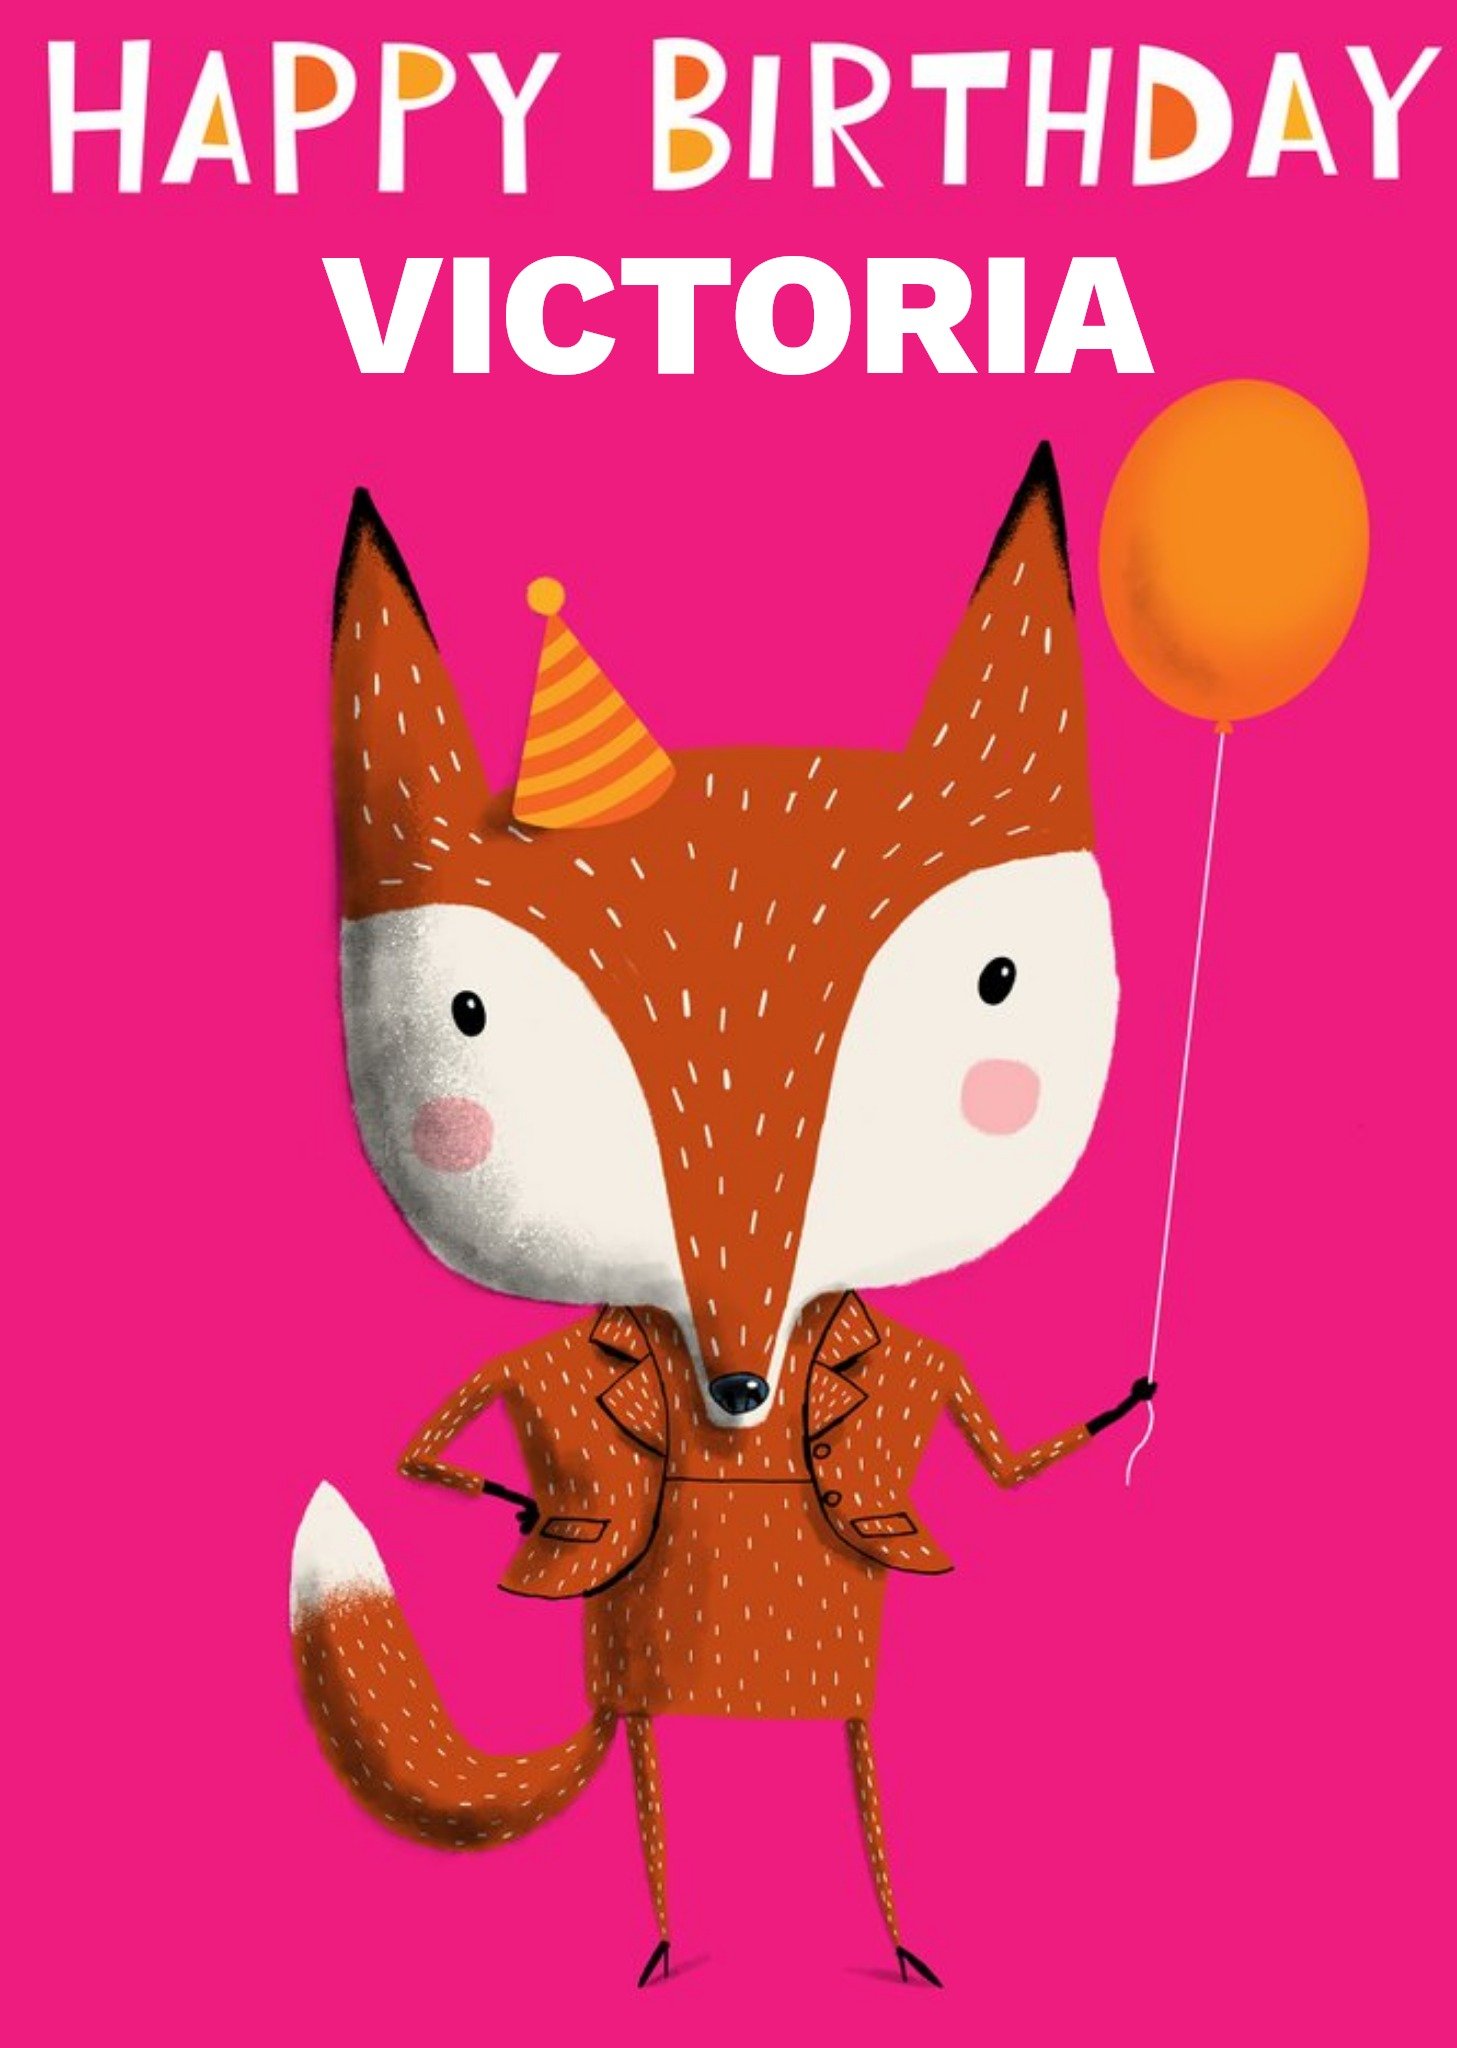 Moonpig Illustration Of A Fox Wearing A Party Hat And Holding A Balloon Birthday Card, Large